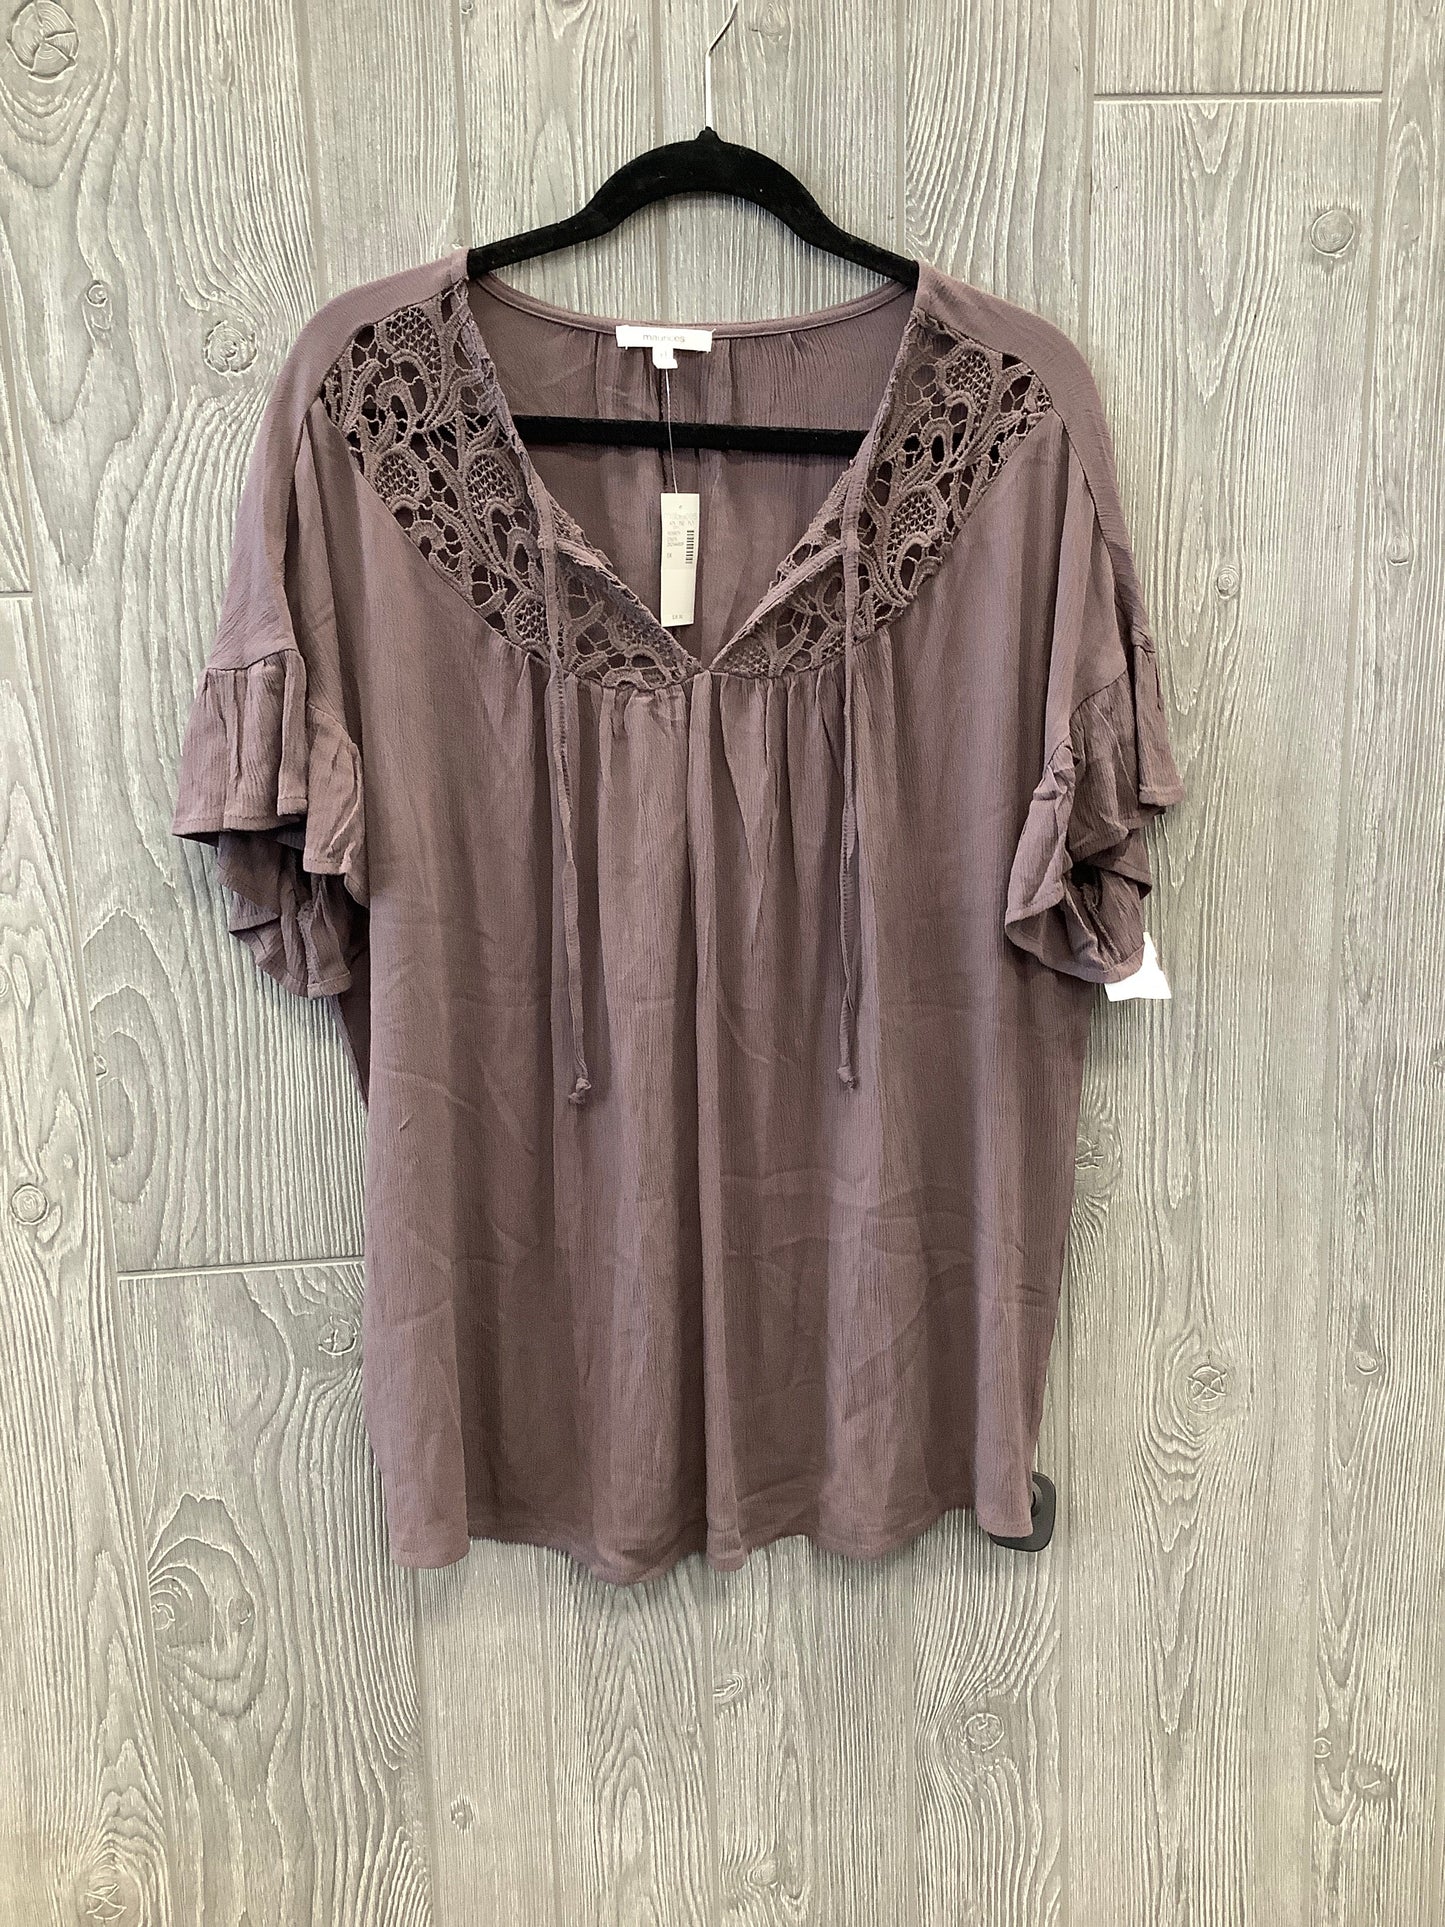 Brown Top Short Sleeve Maurices, Size Xl